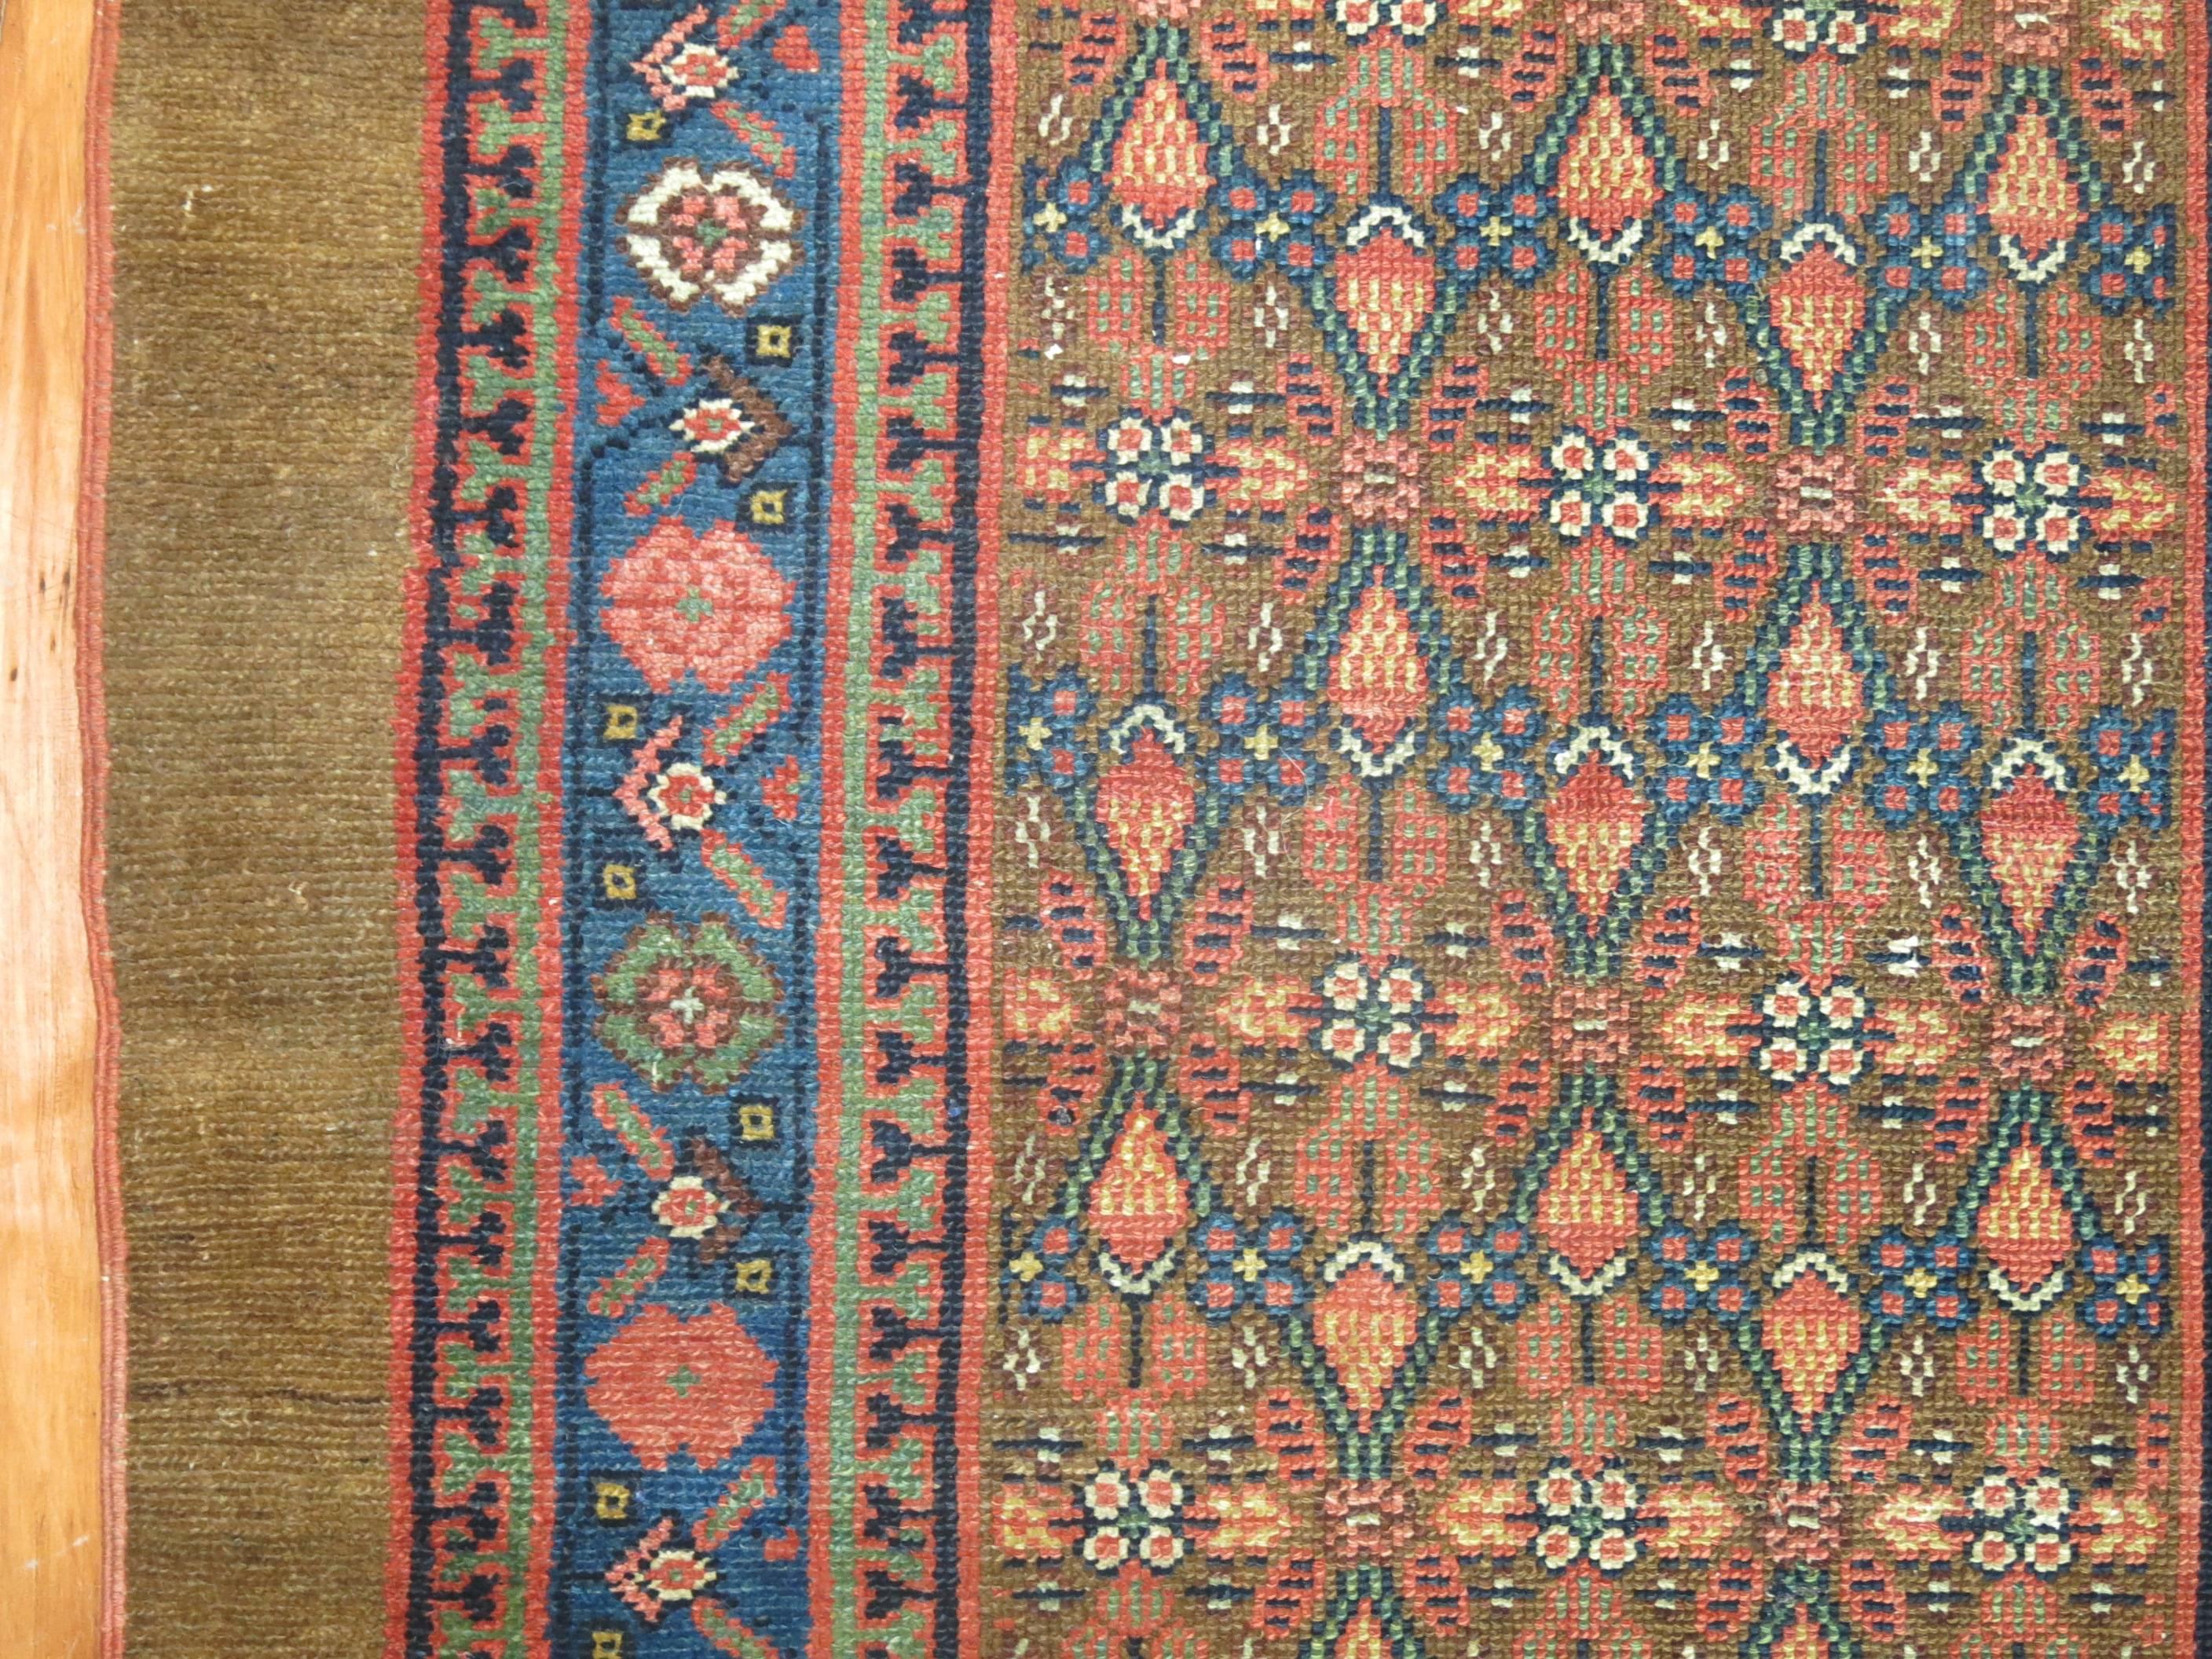 Persian Serabs have become very popular decorative rugs in todays market. Designs that are characteristic of this style include spaciously drawn geometric patterns, which emphasize soft camel color tones. More often or not, a wide unadorned camel